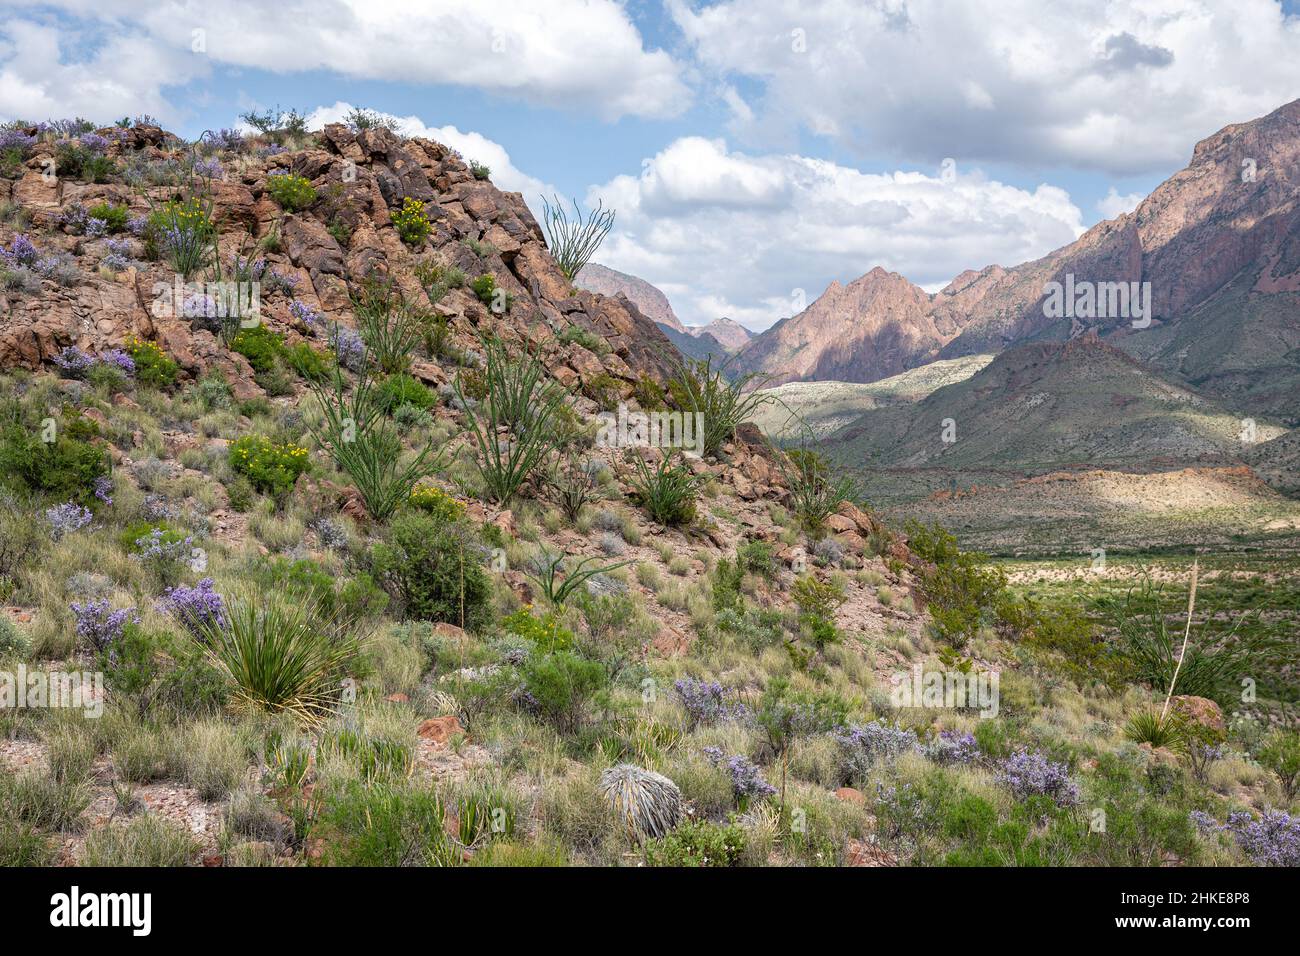 The desert turns green and wildflowers bloom during the summer monsoons in the Chihuahuan Desert. Stock Photo